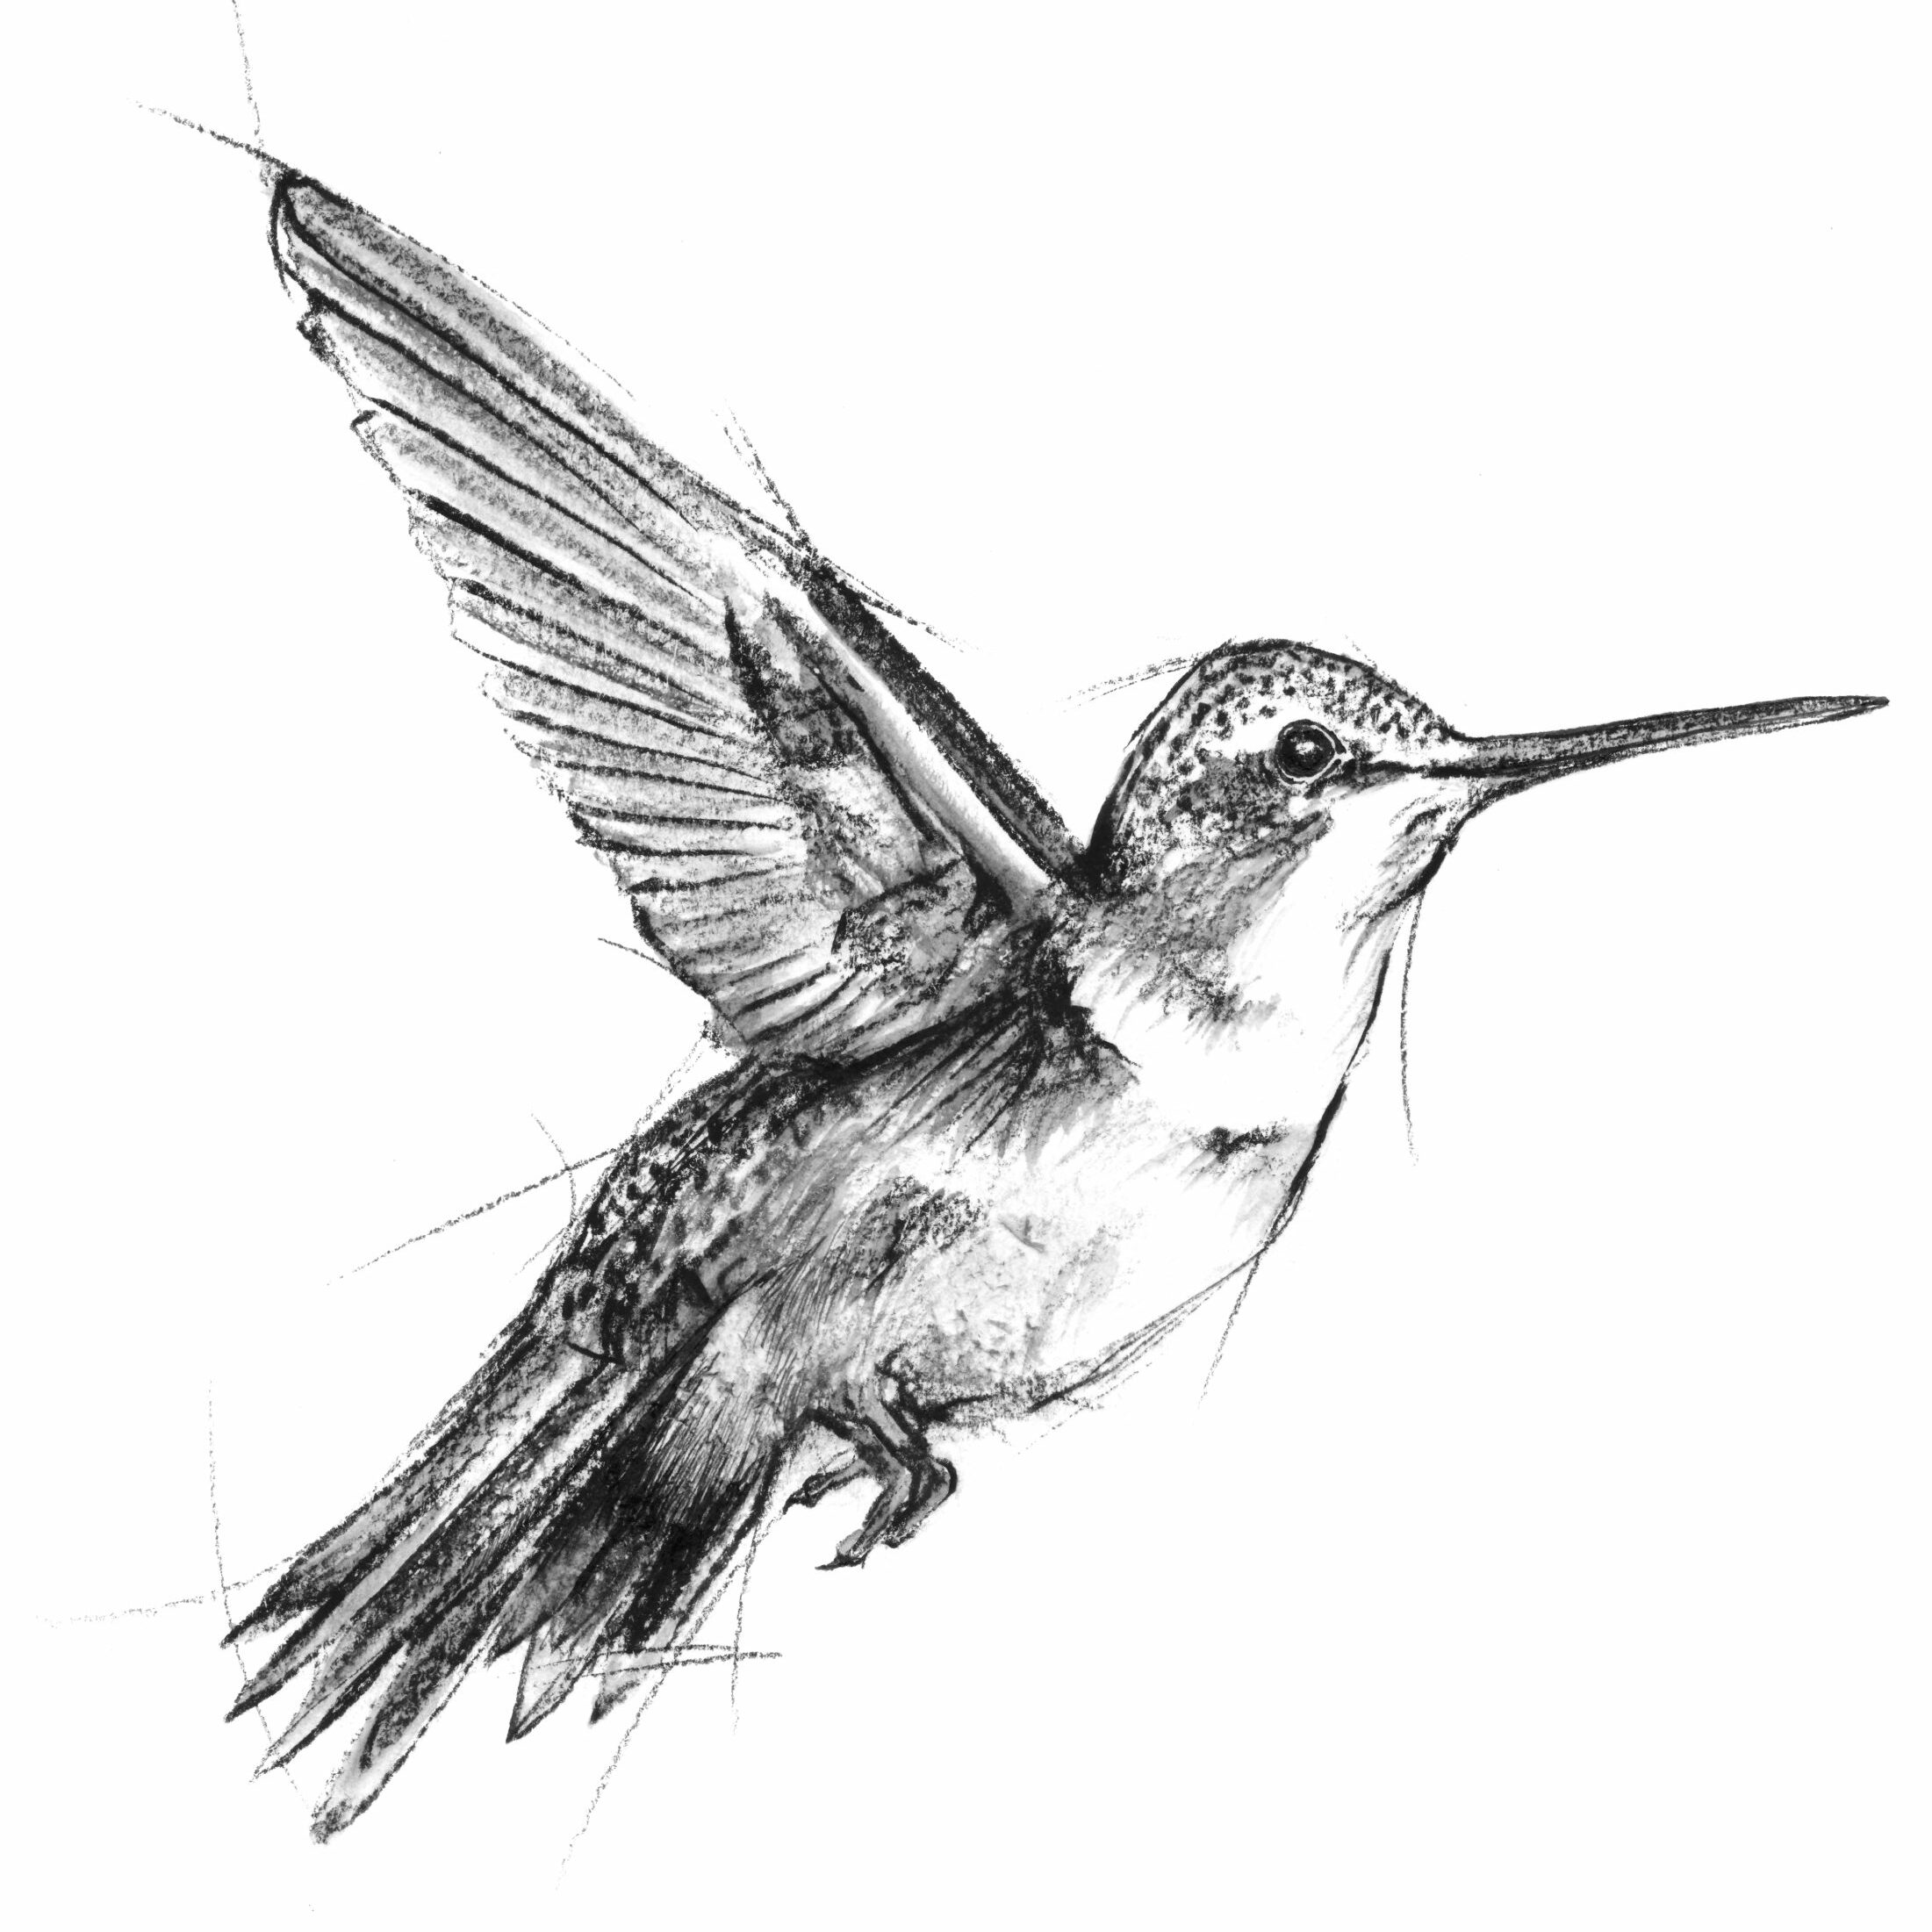 Featured image for “Hummingbird - Original charcoal”